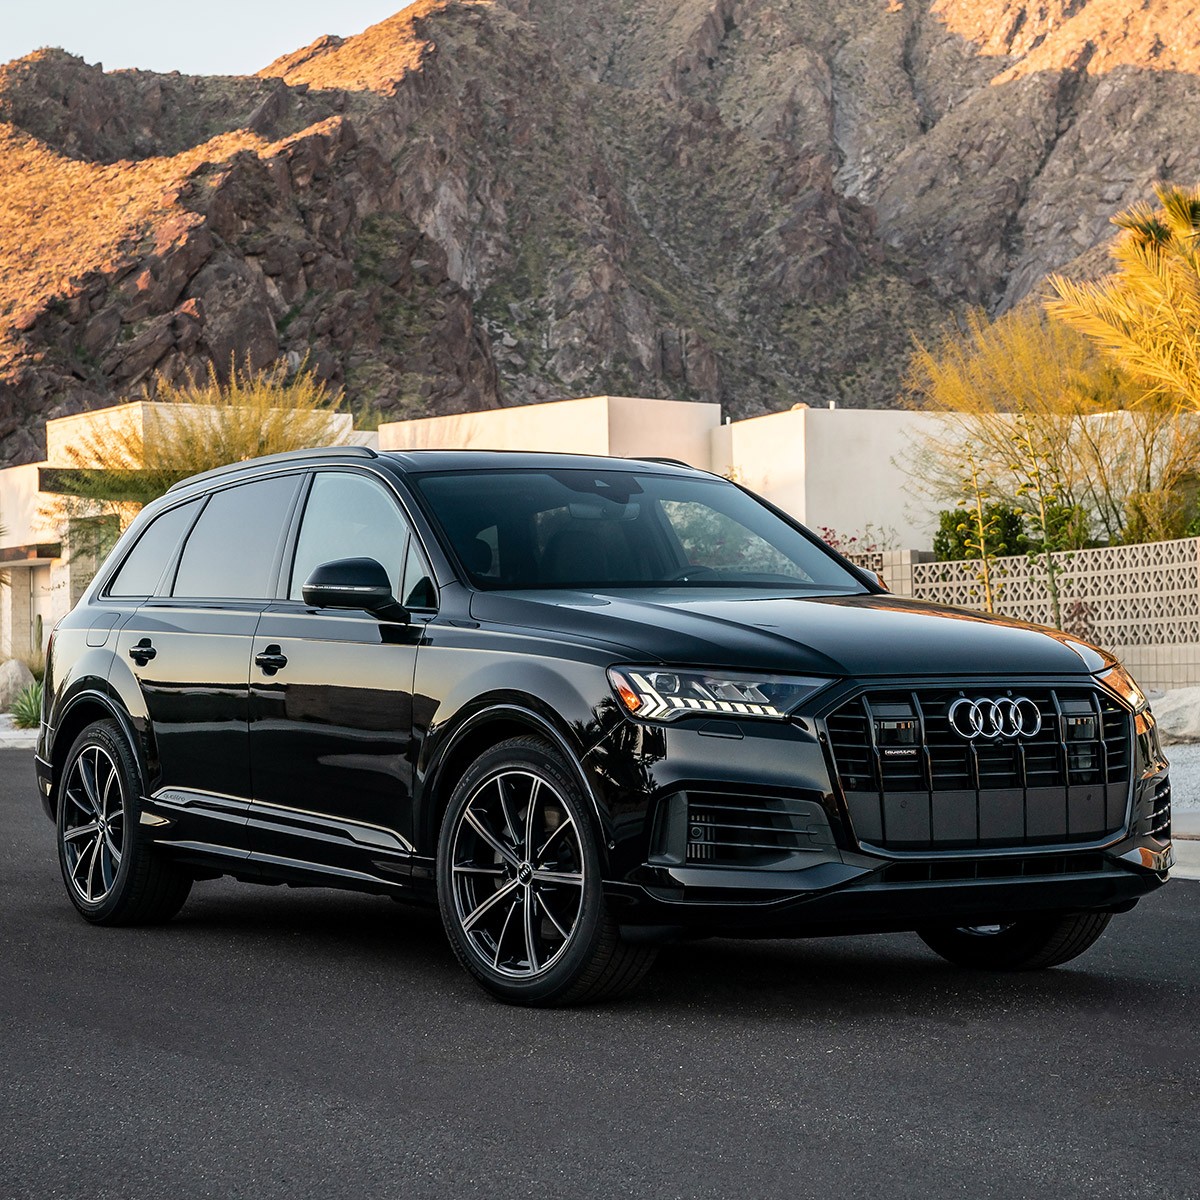 side profile of audi Q7 suv in black color parked on pavement in front of a white house